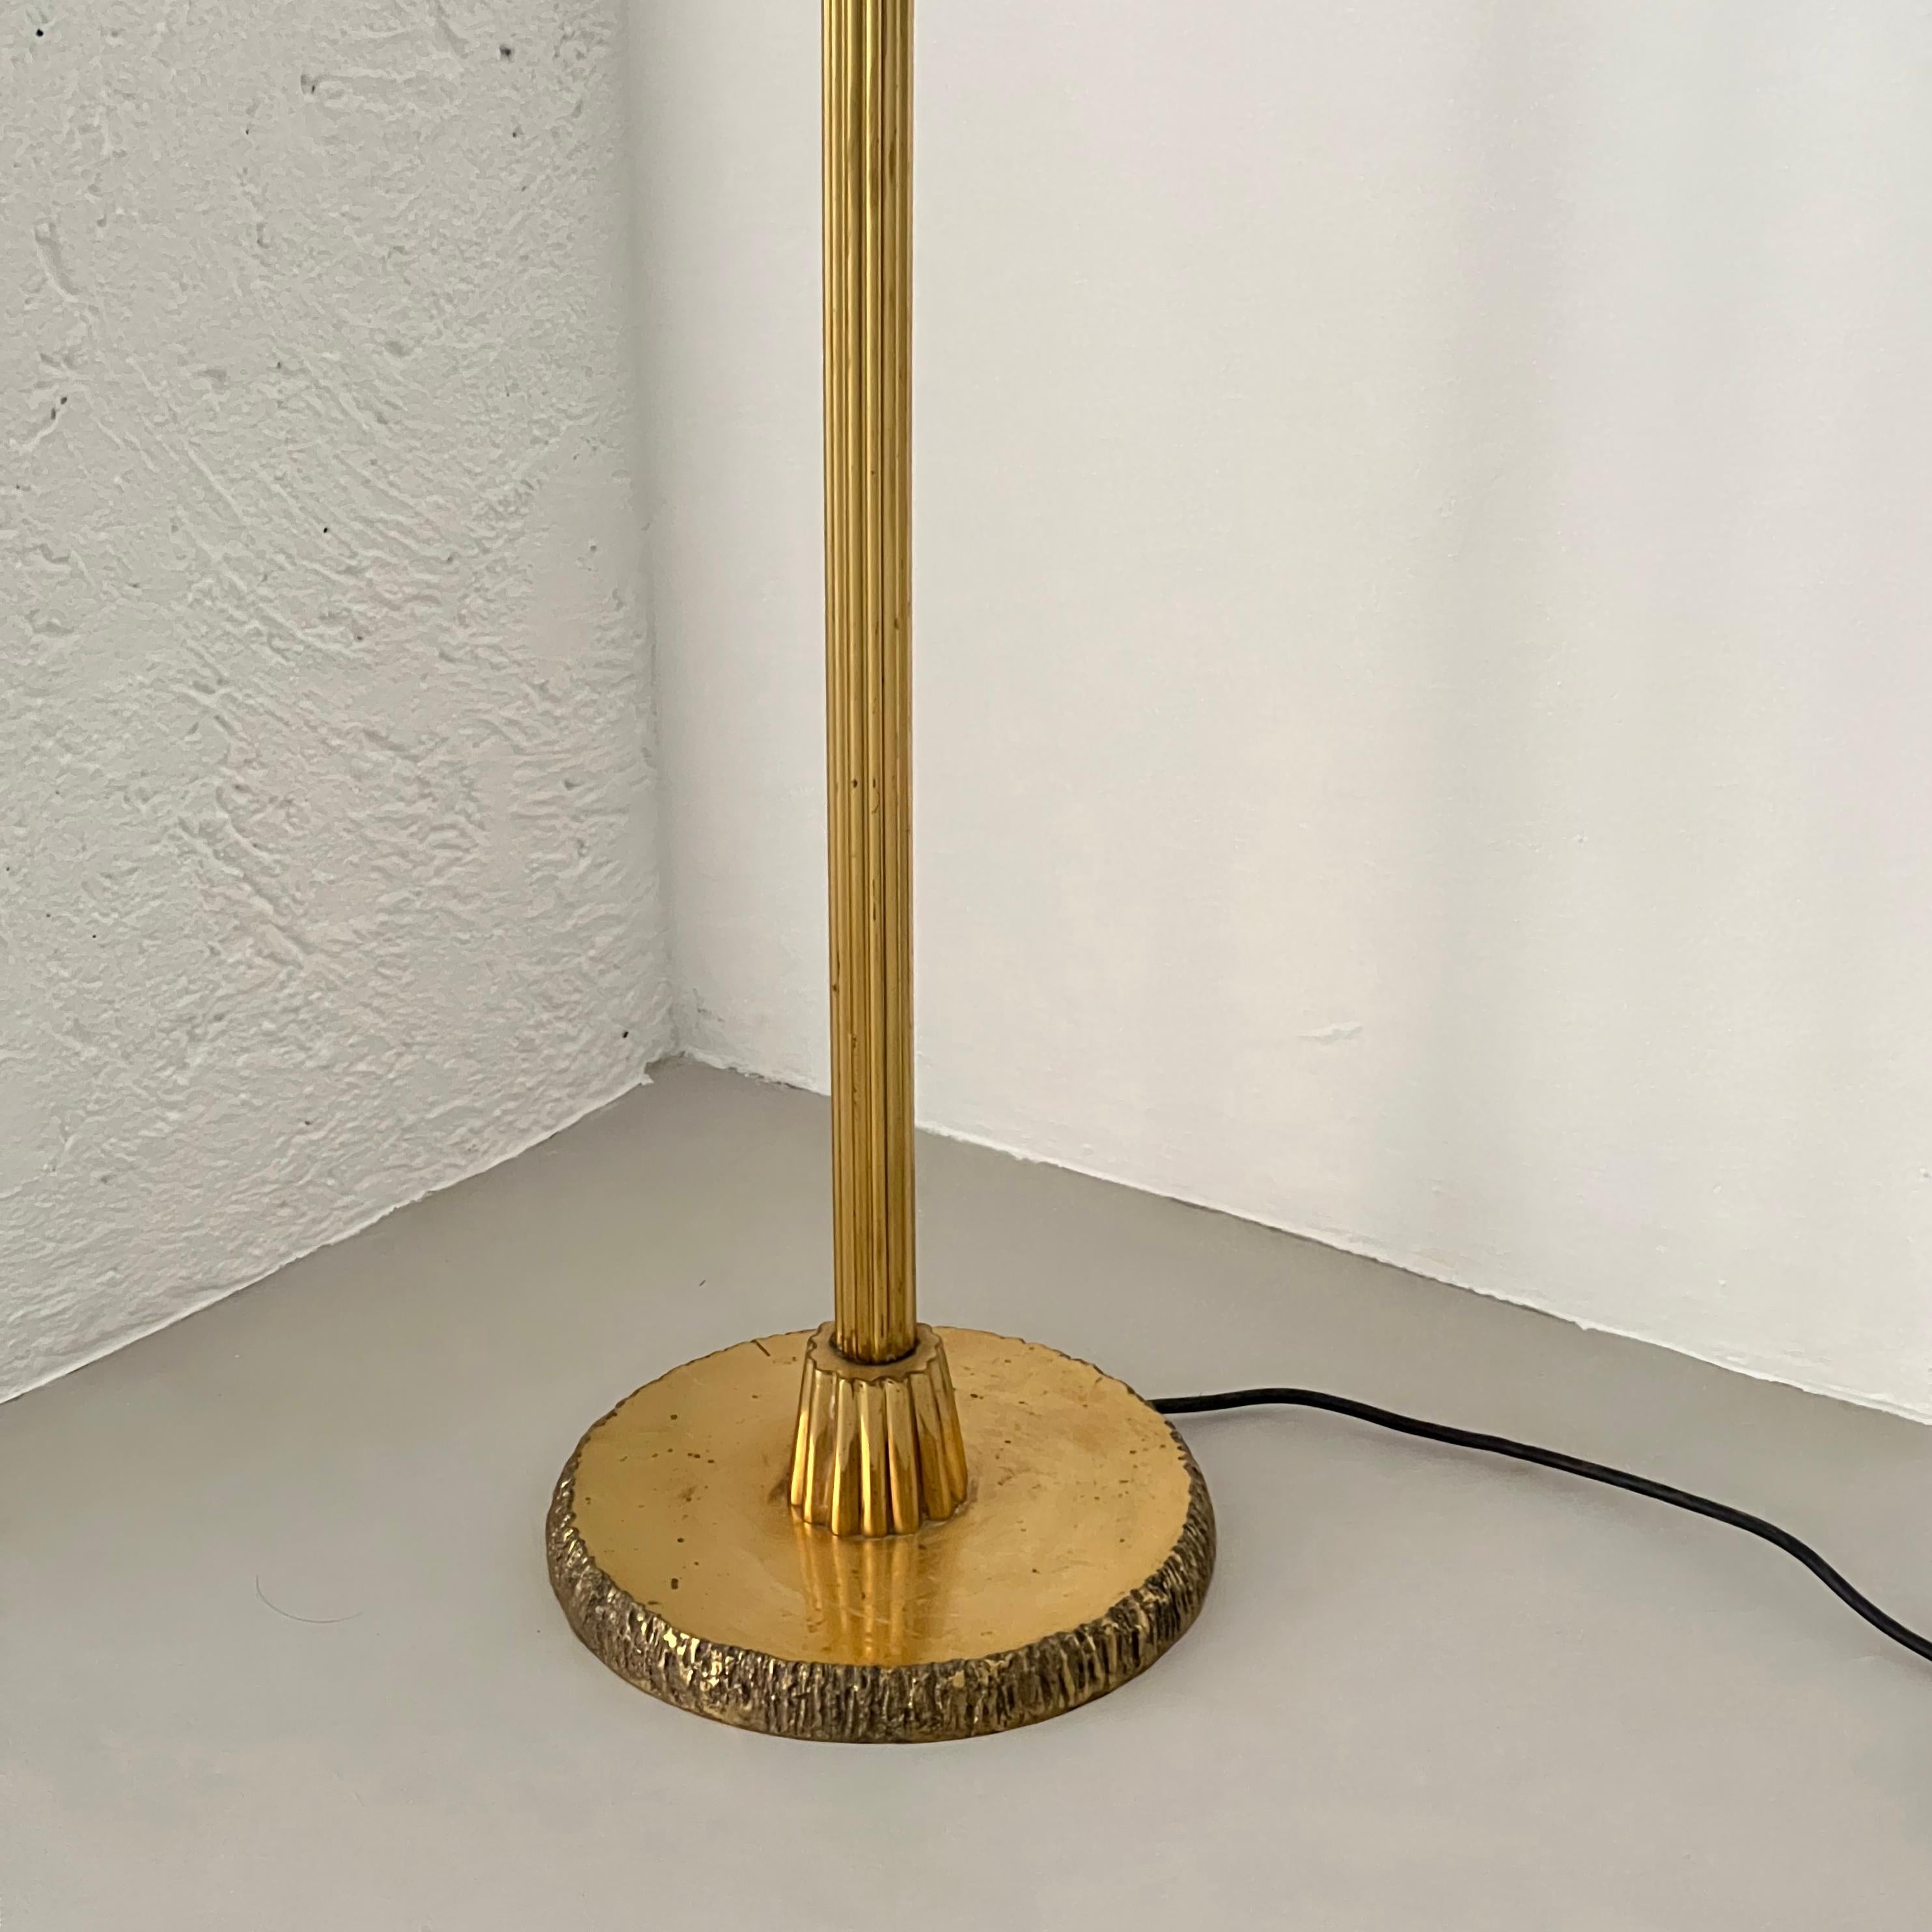 Vintage 50s Italian brass sculptural floor lamp, heart shaped shade, bark finish In Good Condition For Sale In Milan, IT